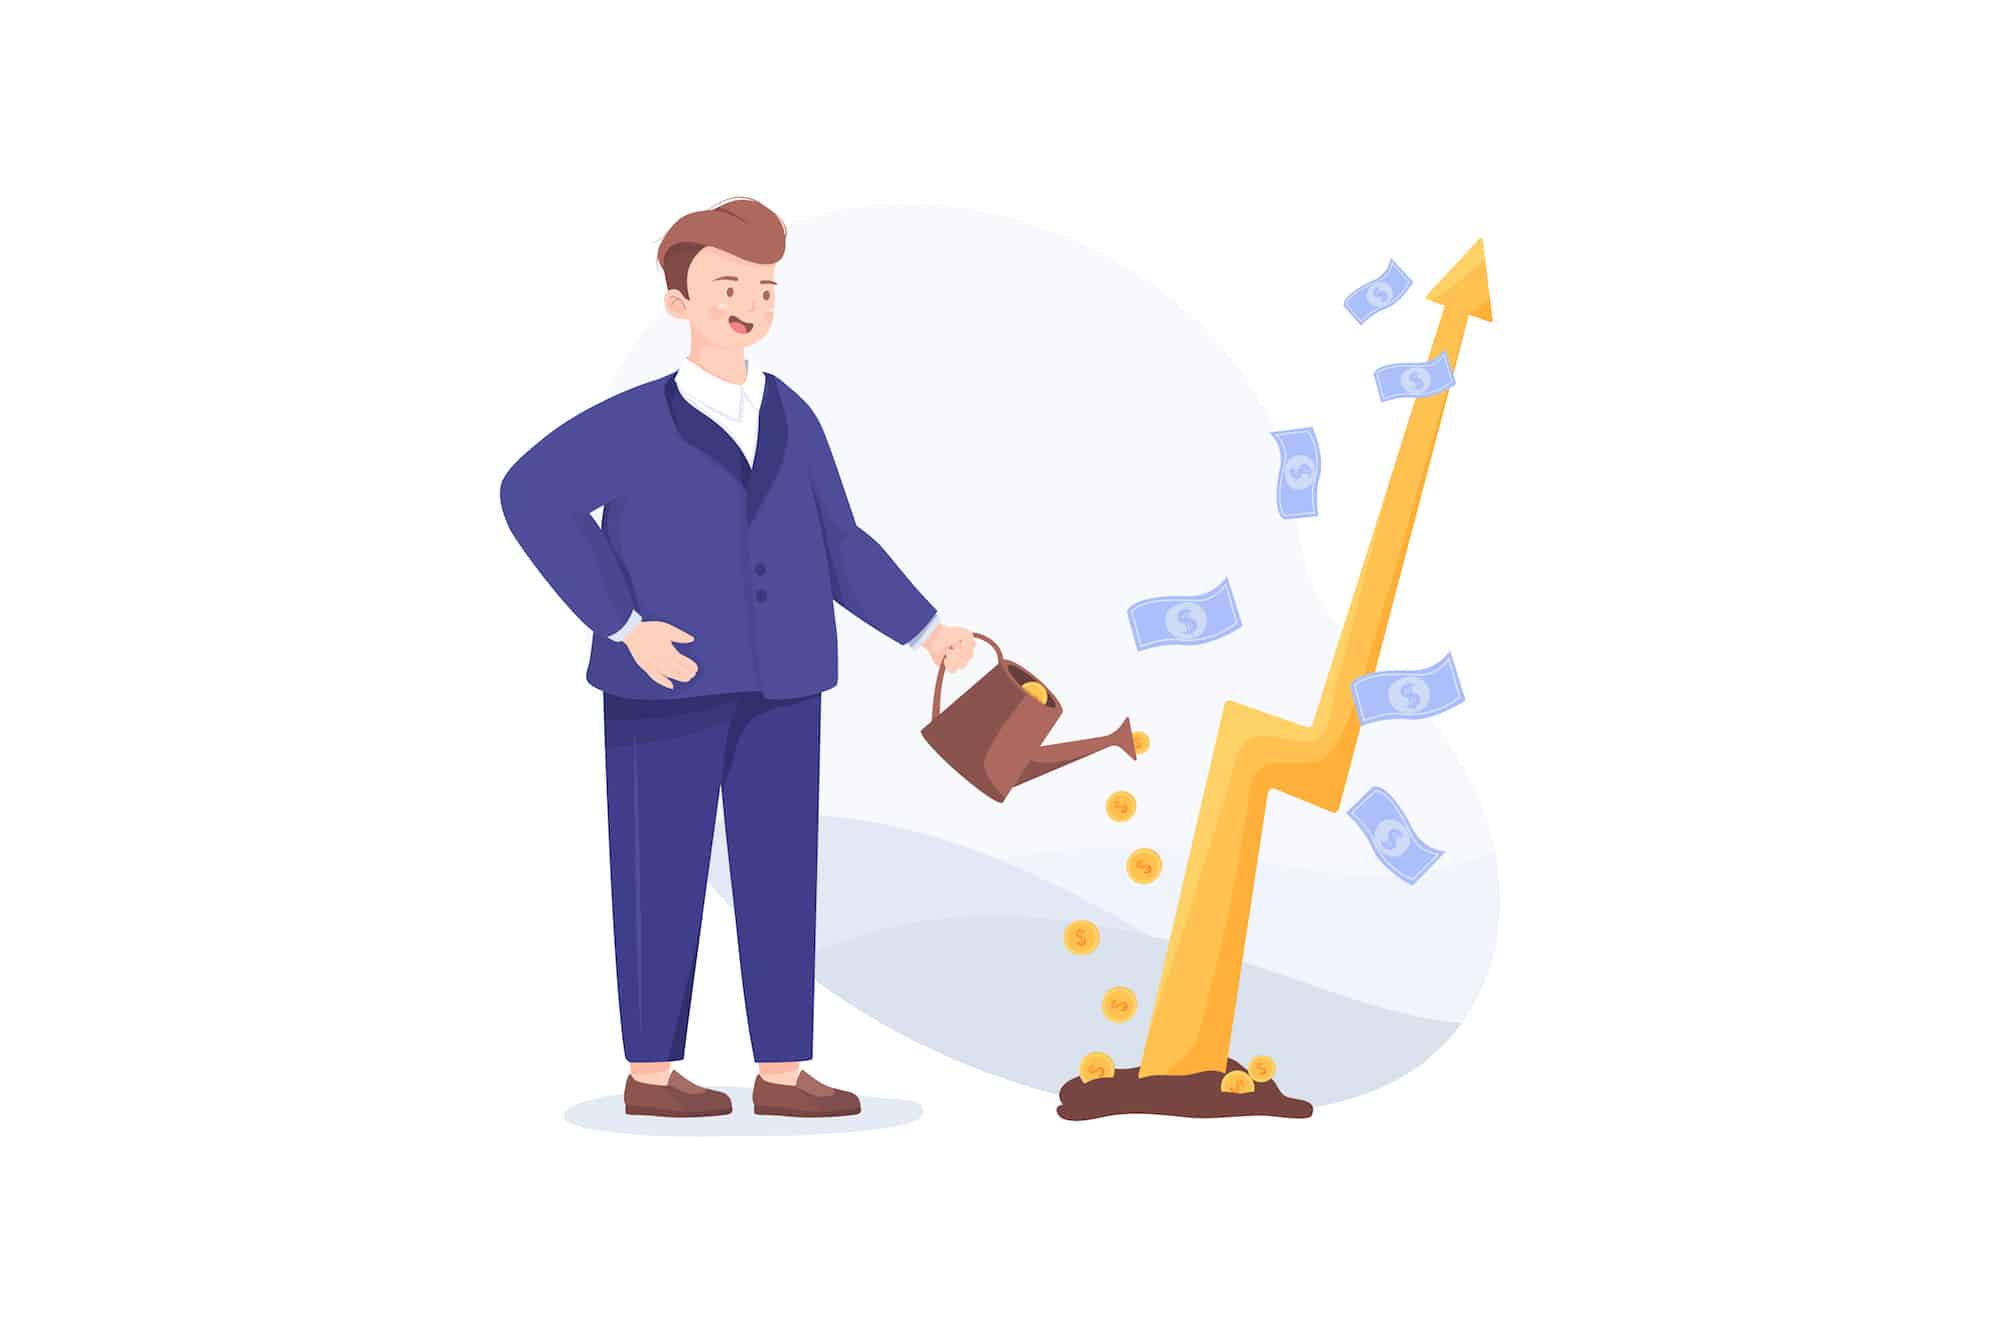 Illustration of a businessman watering the ground with coins and a growth arrow springing up, surrounded by cash